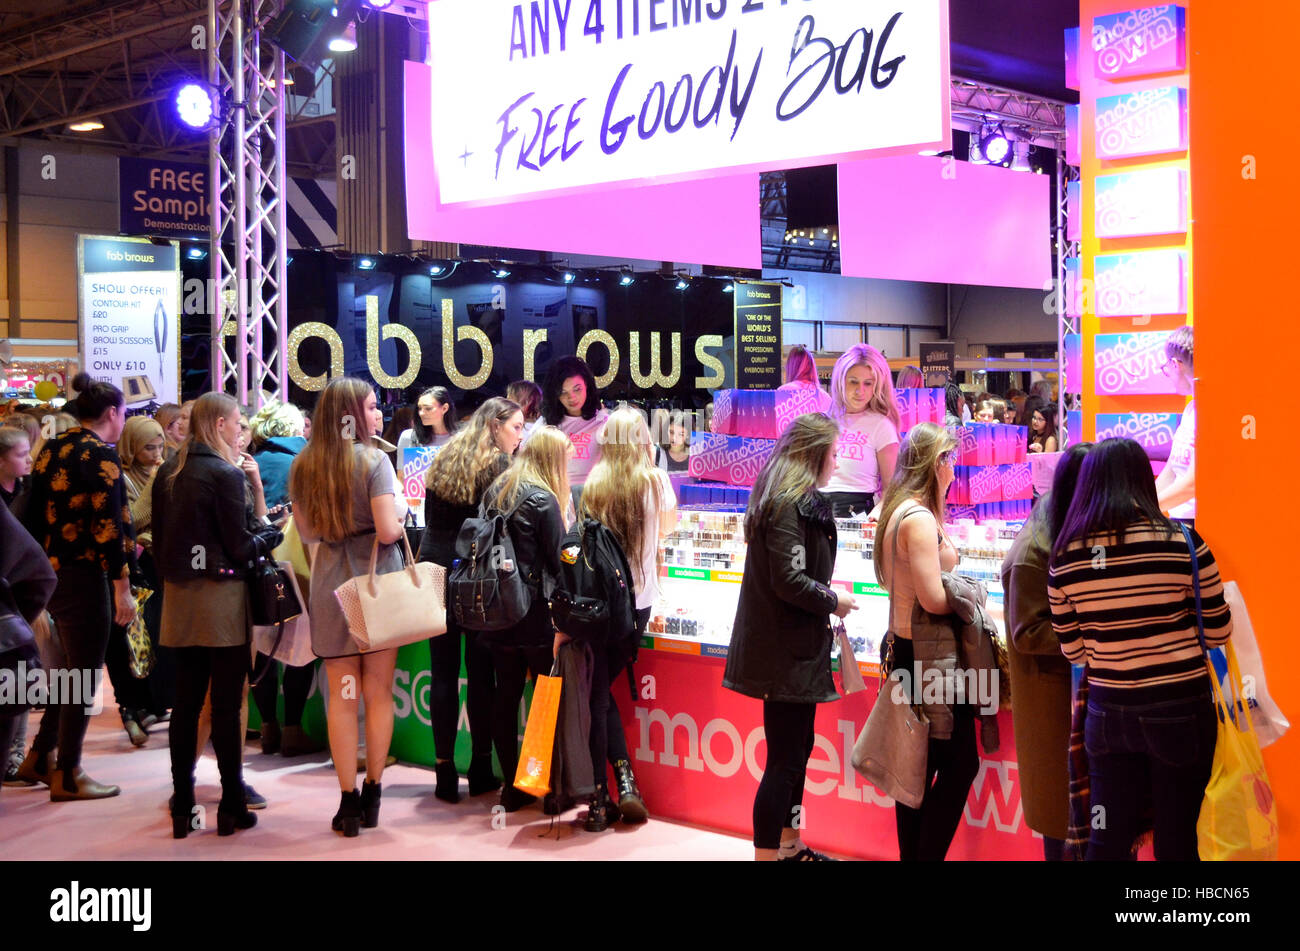 Visitors browse the fashion and beauty stands on the last day of The Clothes Show, NEC, Birmingham, UK. Running from 2-6 December 2016, with the usual exciting mix of fashion, beauty, celebrities, music, and industry experts, The Clothes show was taking place for the final time at the NEC. After 27 successful years at the NEC, the Clothes Show will relocate to Liverpool in July 2017. Credit:  Antony Nettle/Alamy Live News Stock Photo